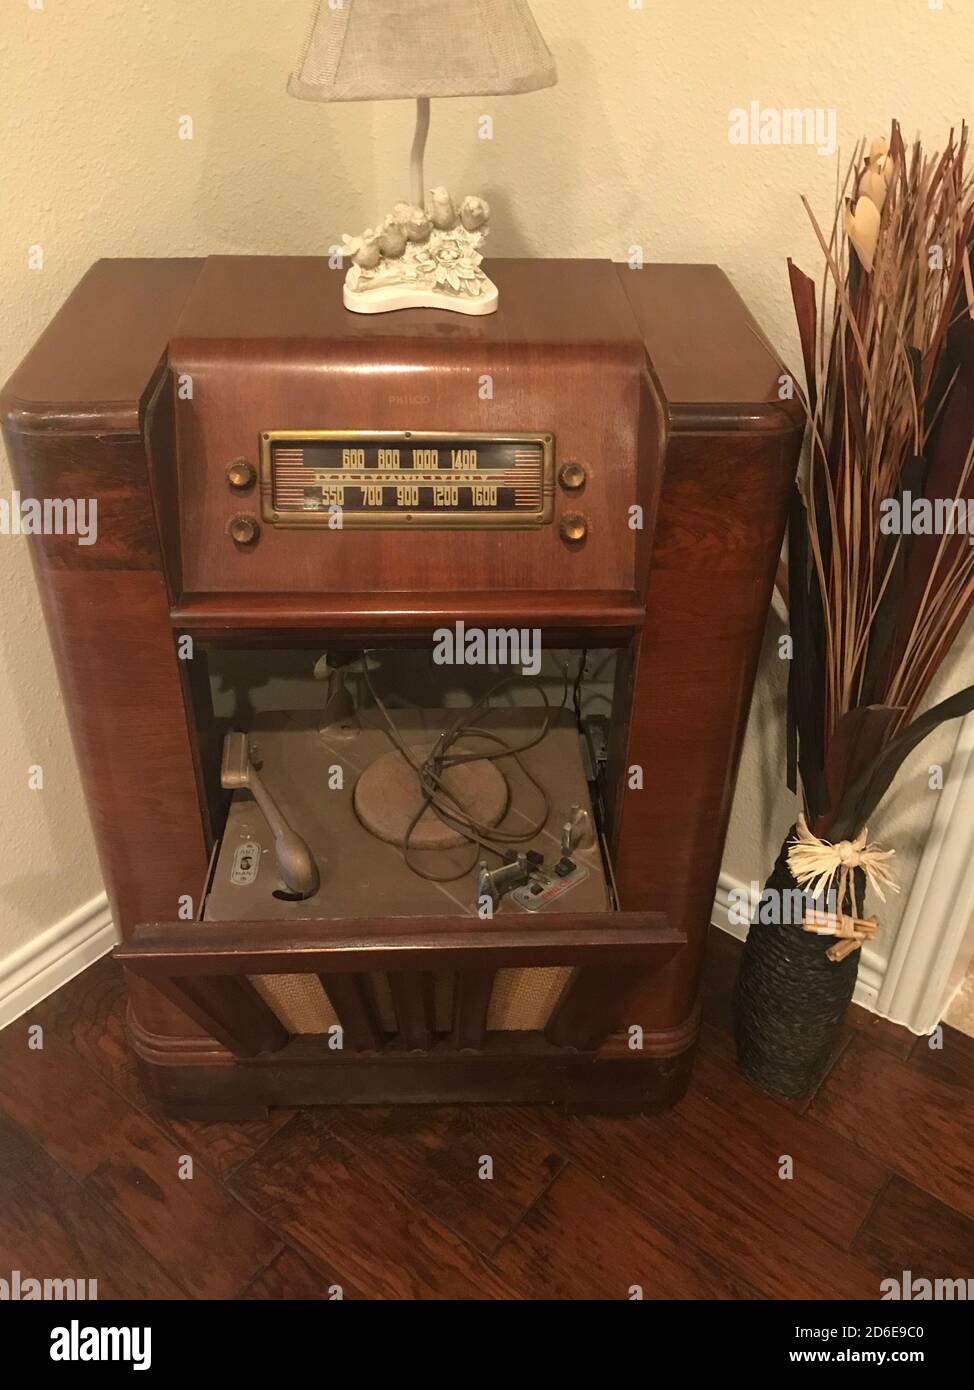 Vintage record player and radio in a cabinet Stock Photo